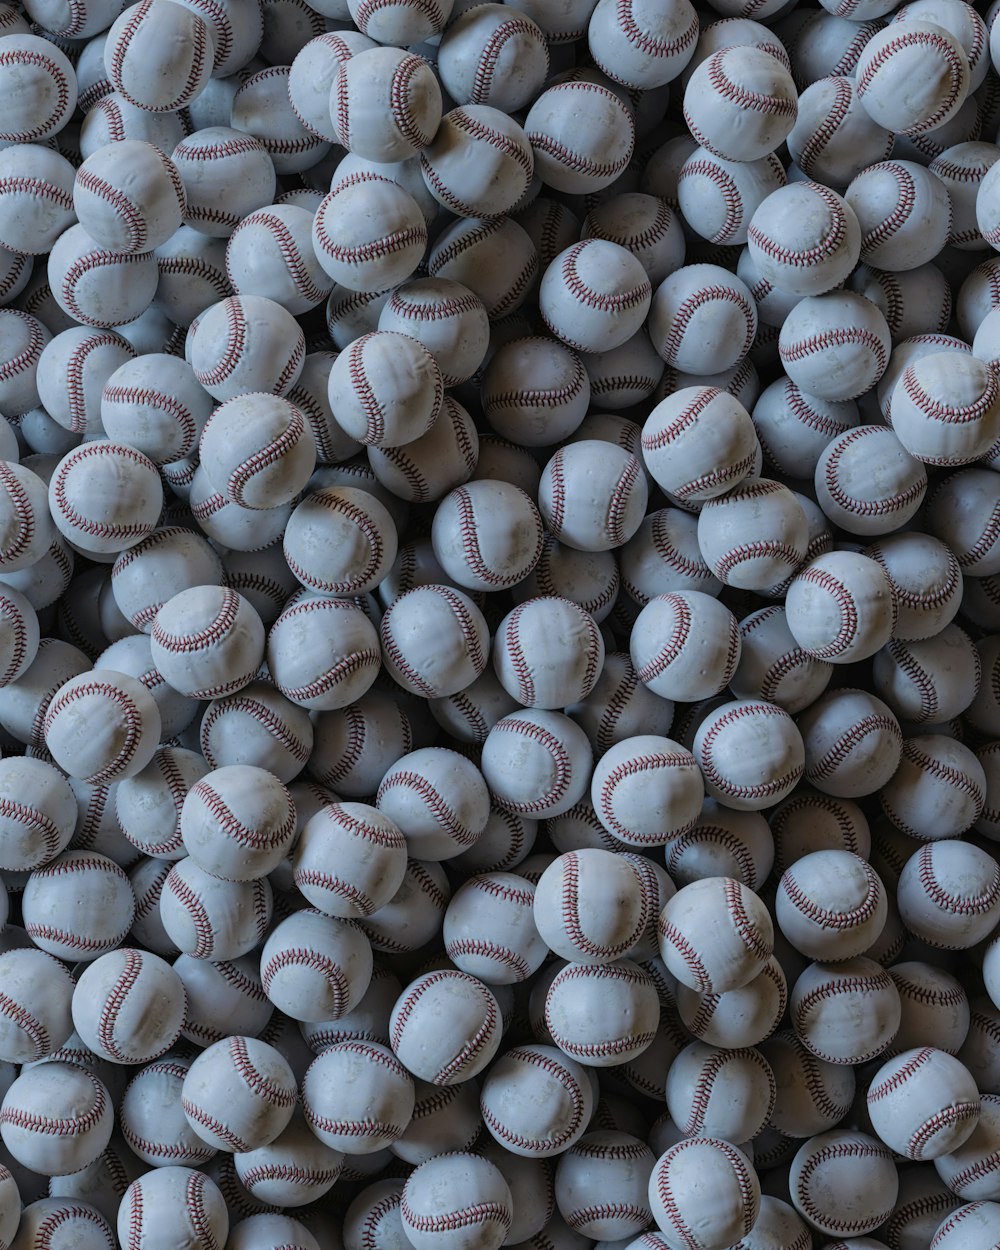 a large pile of baseballs sitting on top of each other